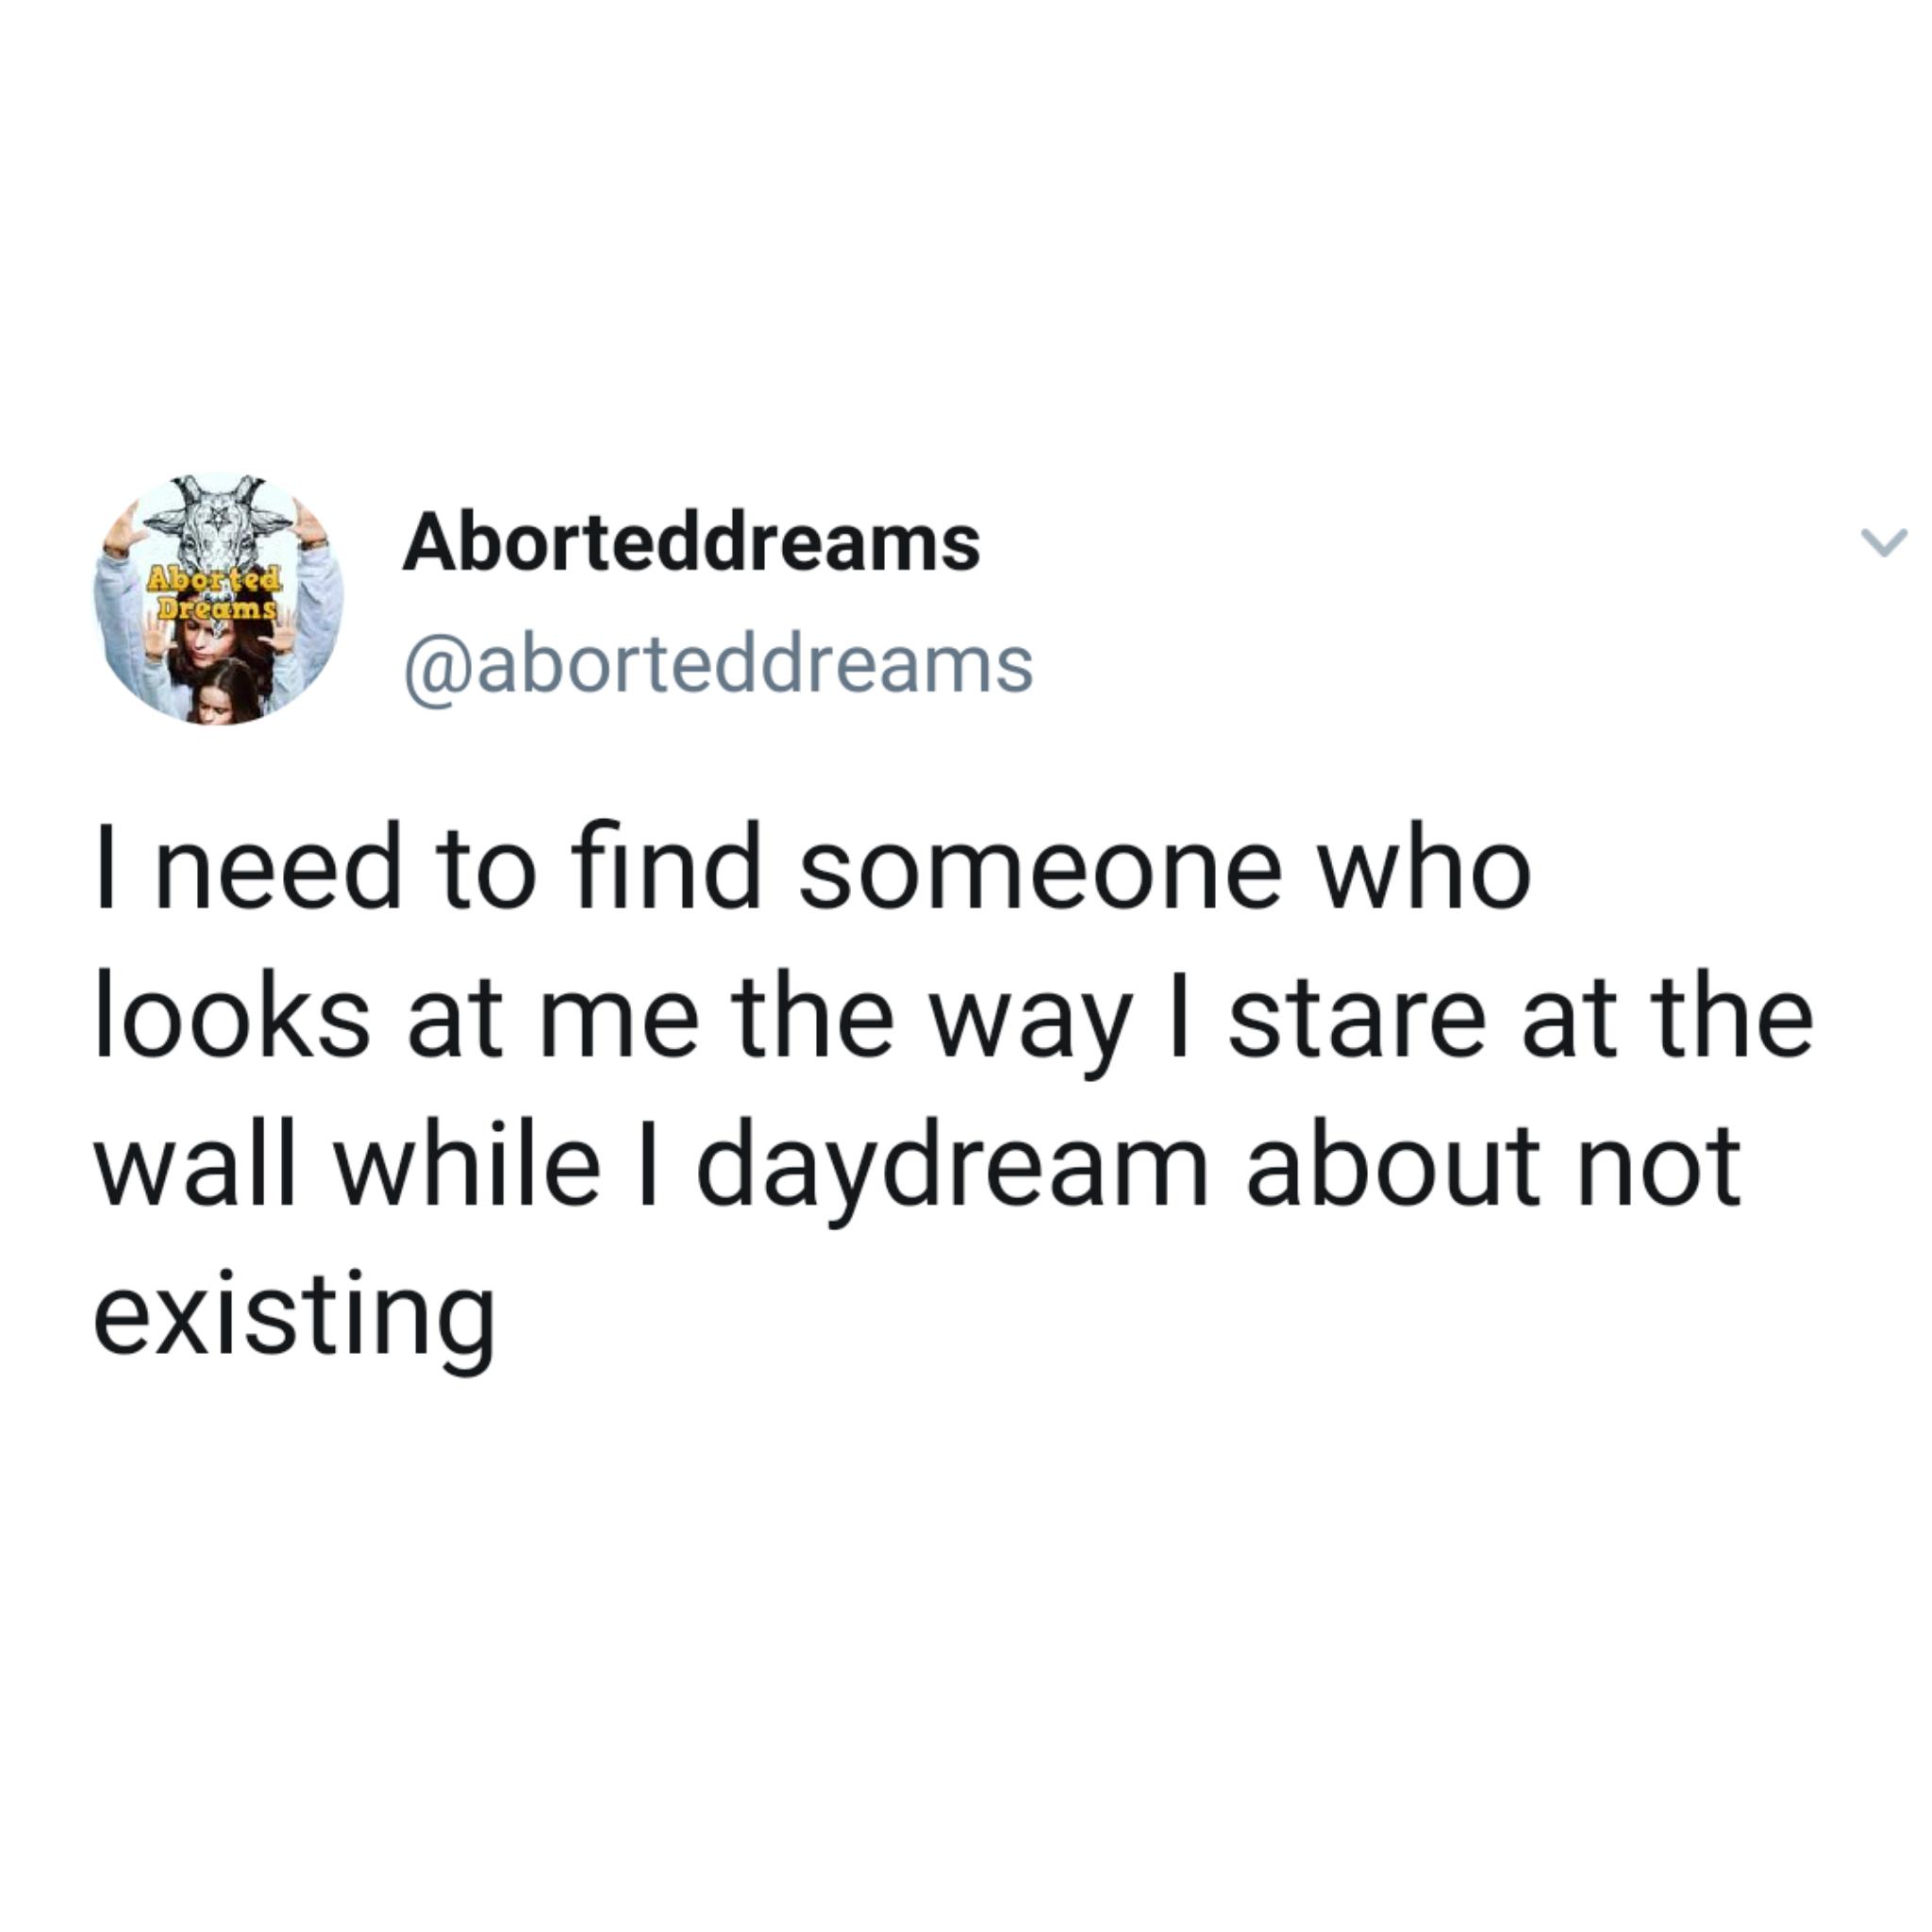 Depression,  depression memes Depression,  text: Aborteddreams Dr&m @aborteddreams I need to find someone who looks at me the way I stare at the wall while I daydream about not existing 